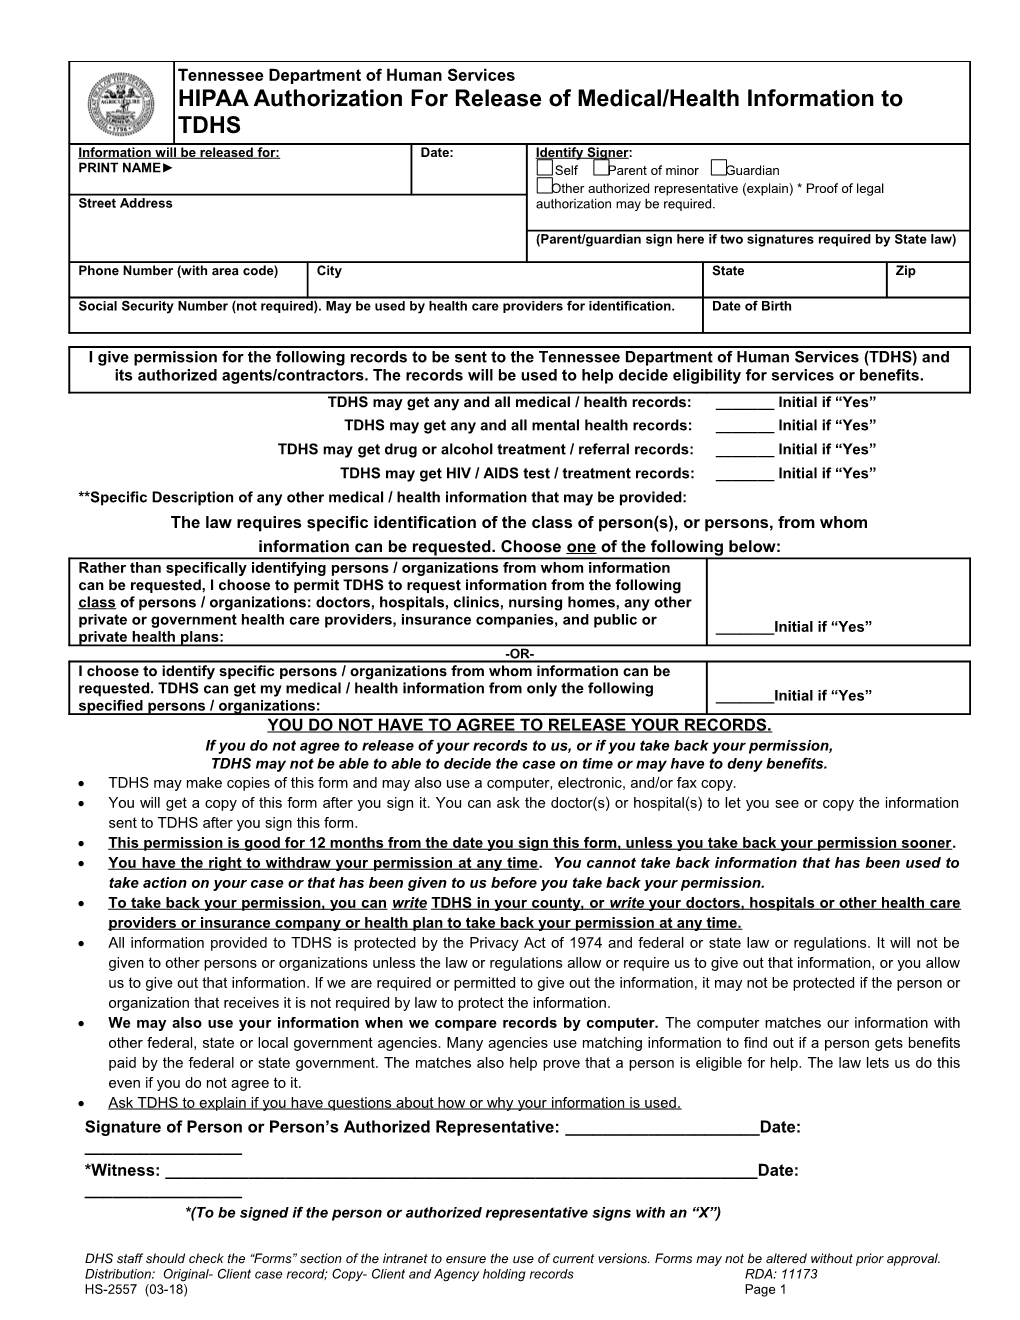 TDHS May Make Copies of This Form and May Also Use a Computer, Electronic, And/Or Fax Copy